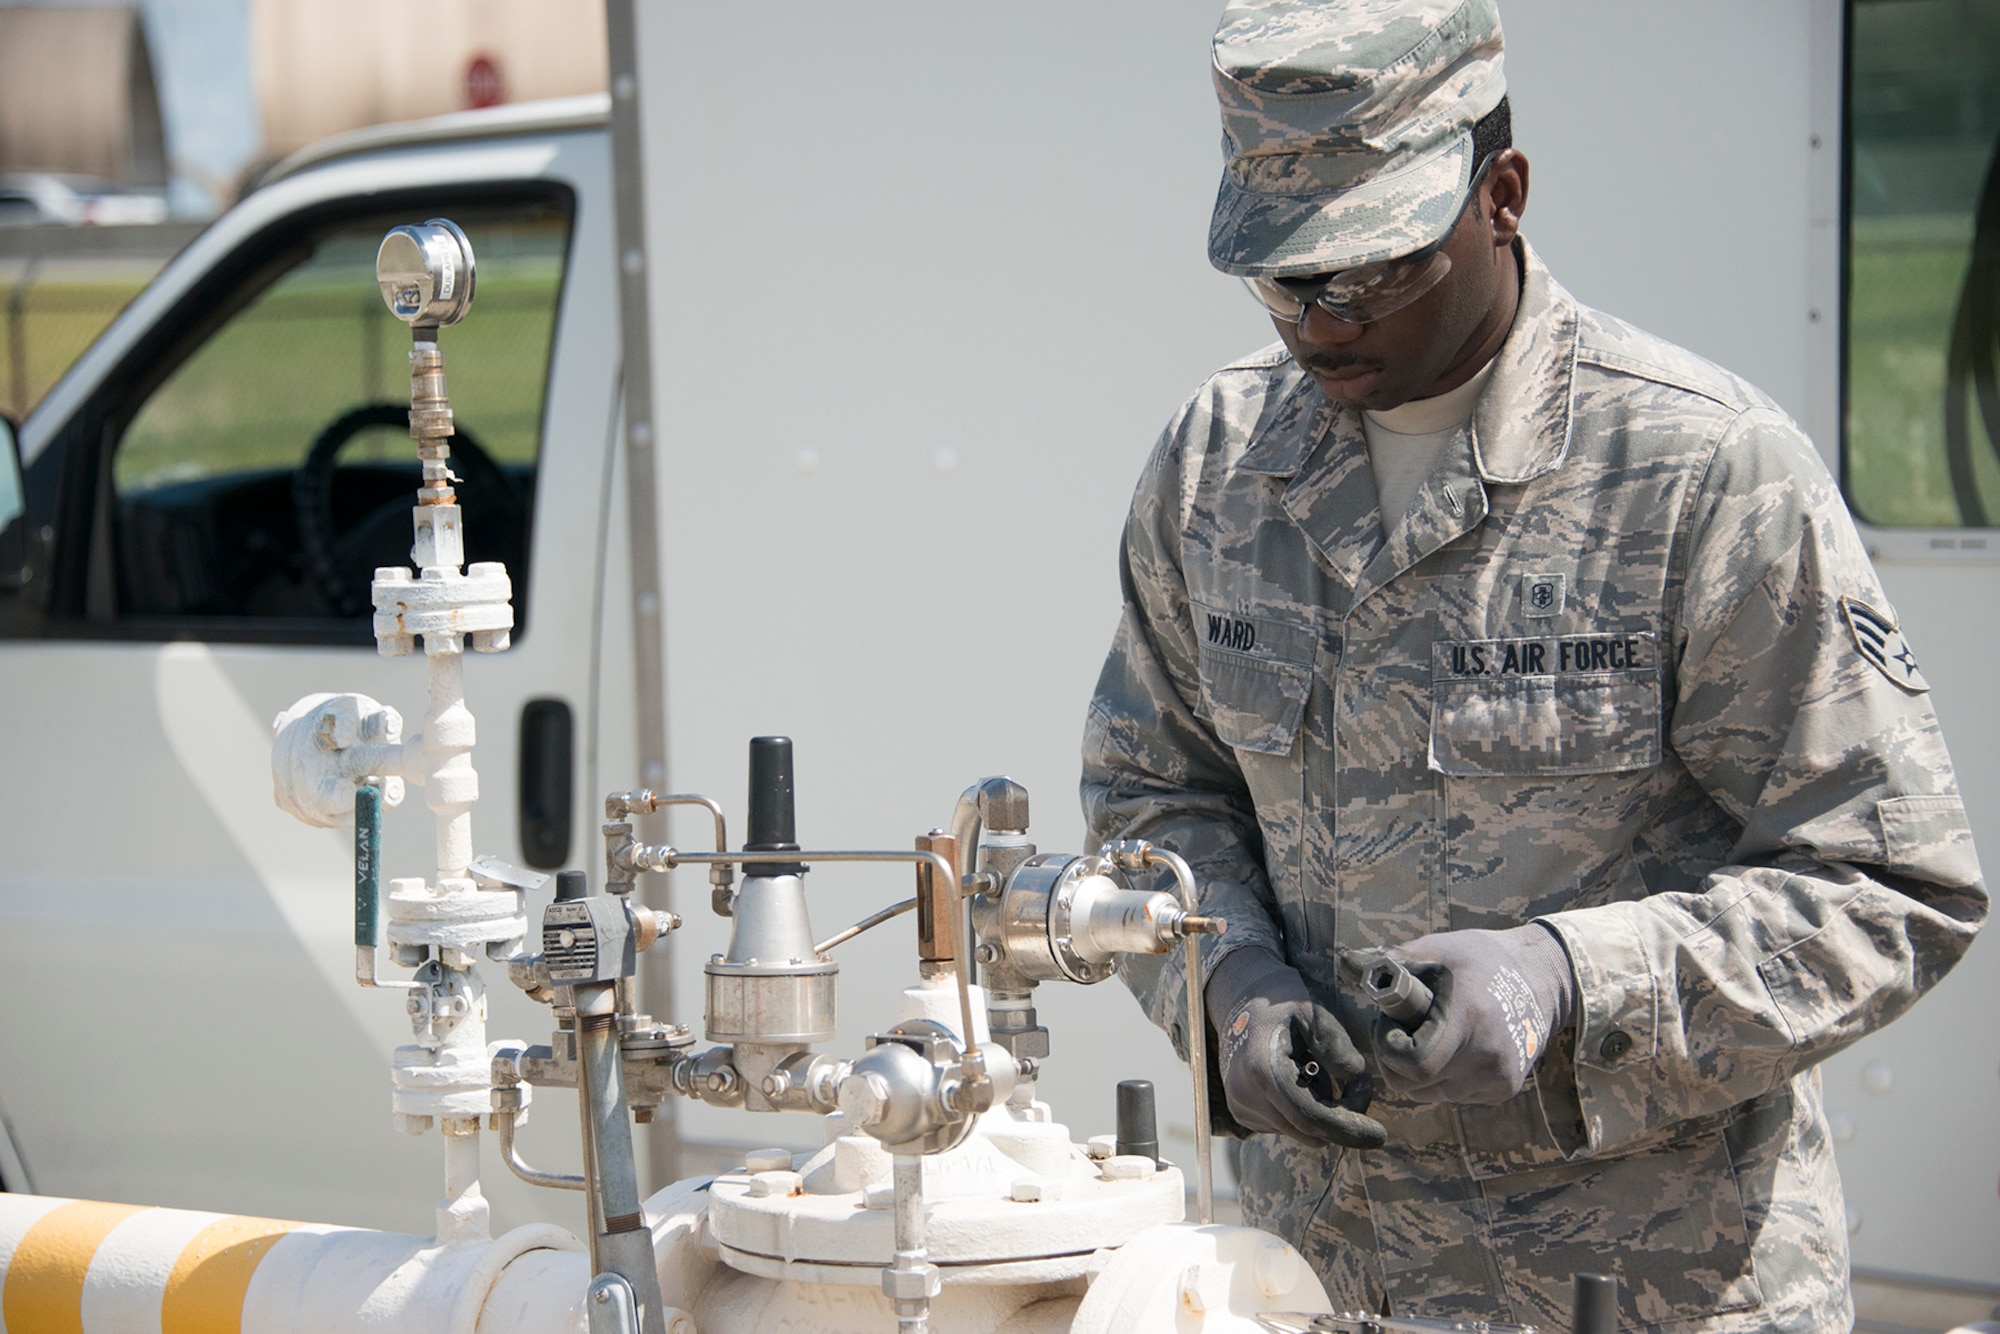 Senior Airman Darnell Ward, 919th Special Operations Civil Engineer Squadron, calibrates the automatic control valve on the fuel line at Eglin Air Force Base, Fla.,July 8, 2017. The fuel line controls the pressure and rate at which fuel is transferred from the storage tanks to vehicles which service aircraft arriving and departing the base. The tests ensure there is no damage to aircraft or refueling vehicles due to tanks being over pressurized. (Air Force photo/Lt. Col. James R. Wilson)